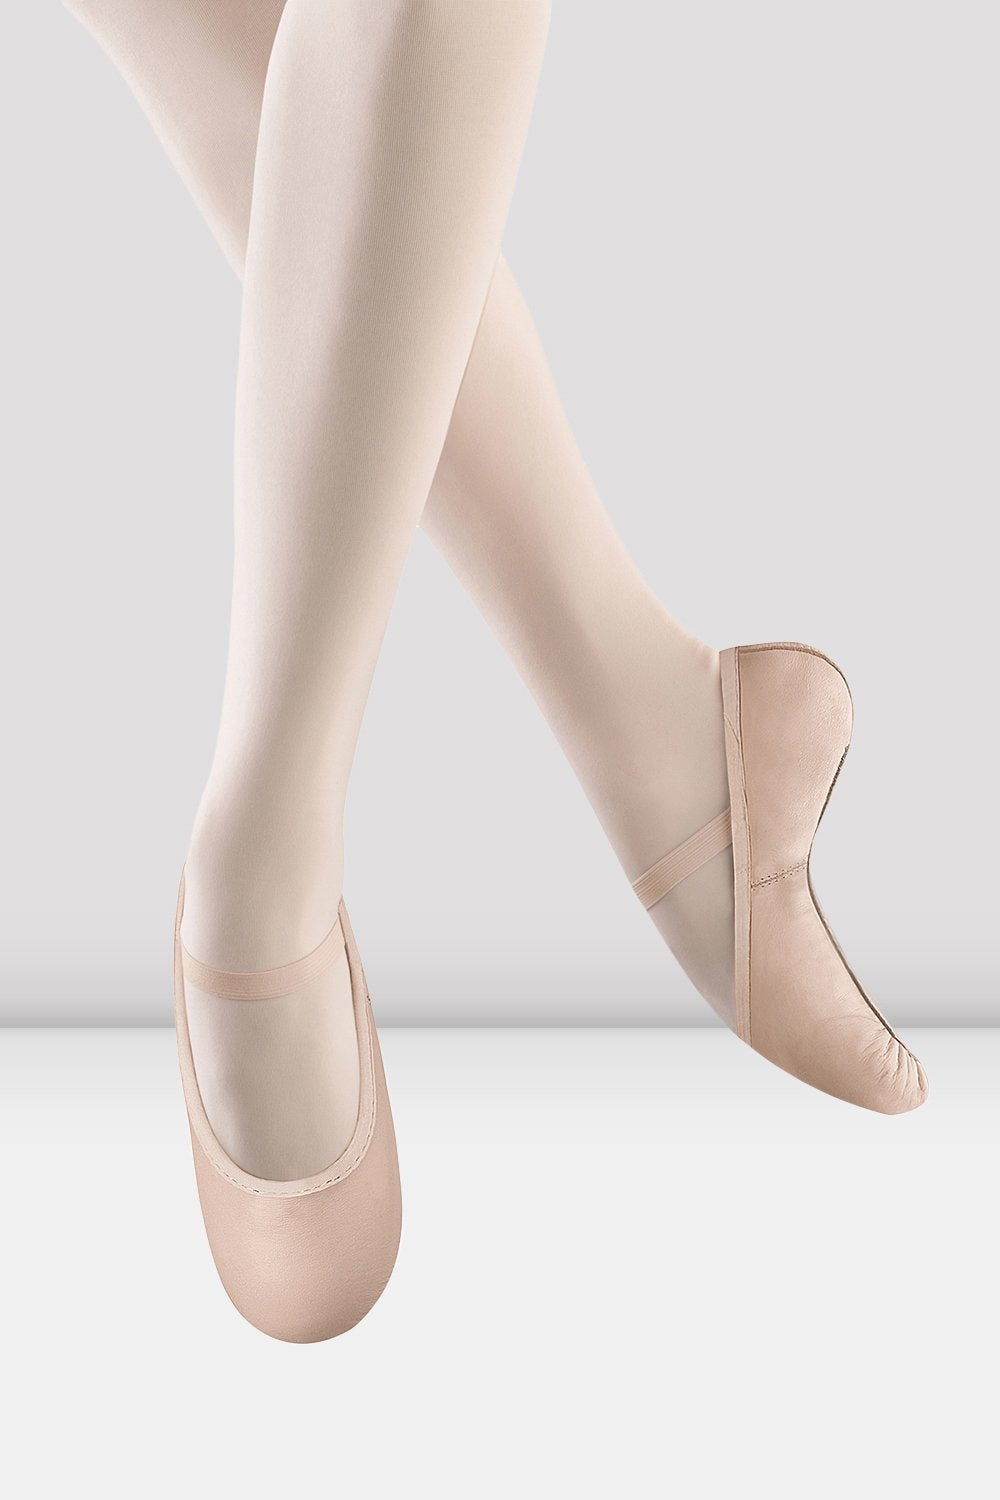 BLOCH CONTOURSOFT FOOTED TIGHT (FREE POSTAGE)